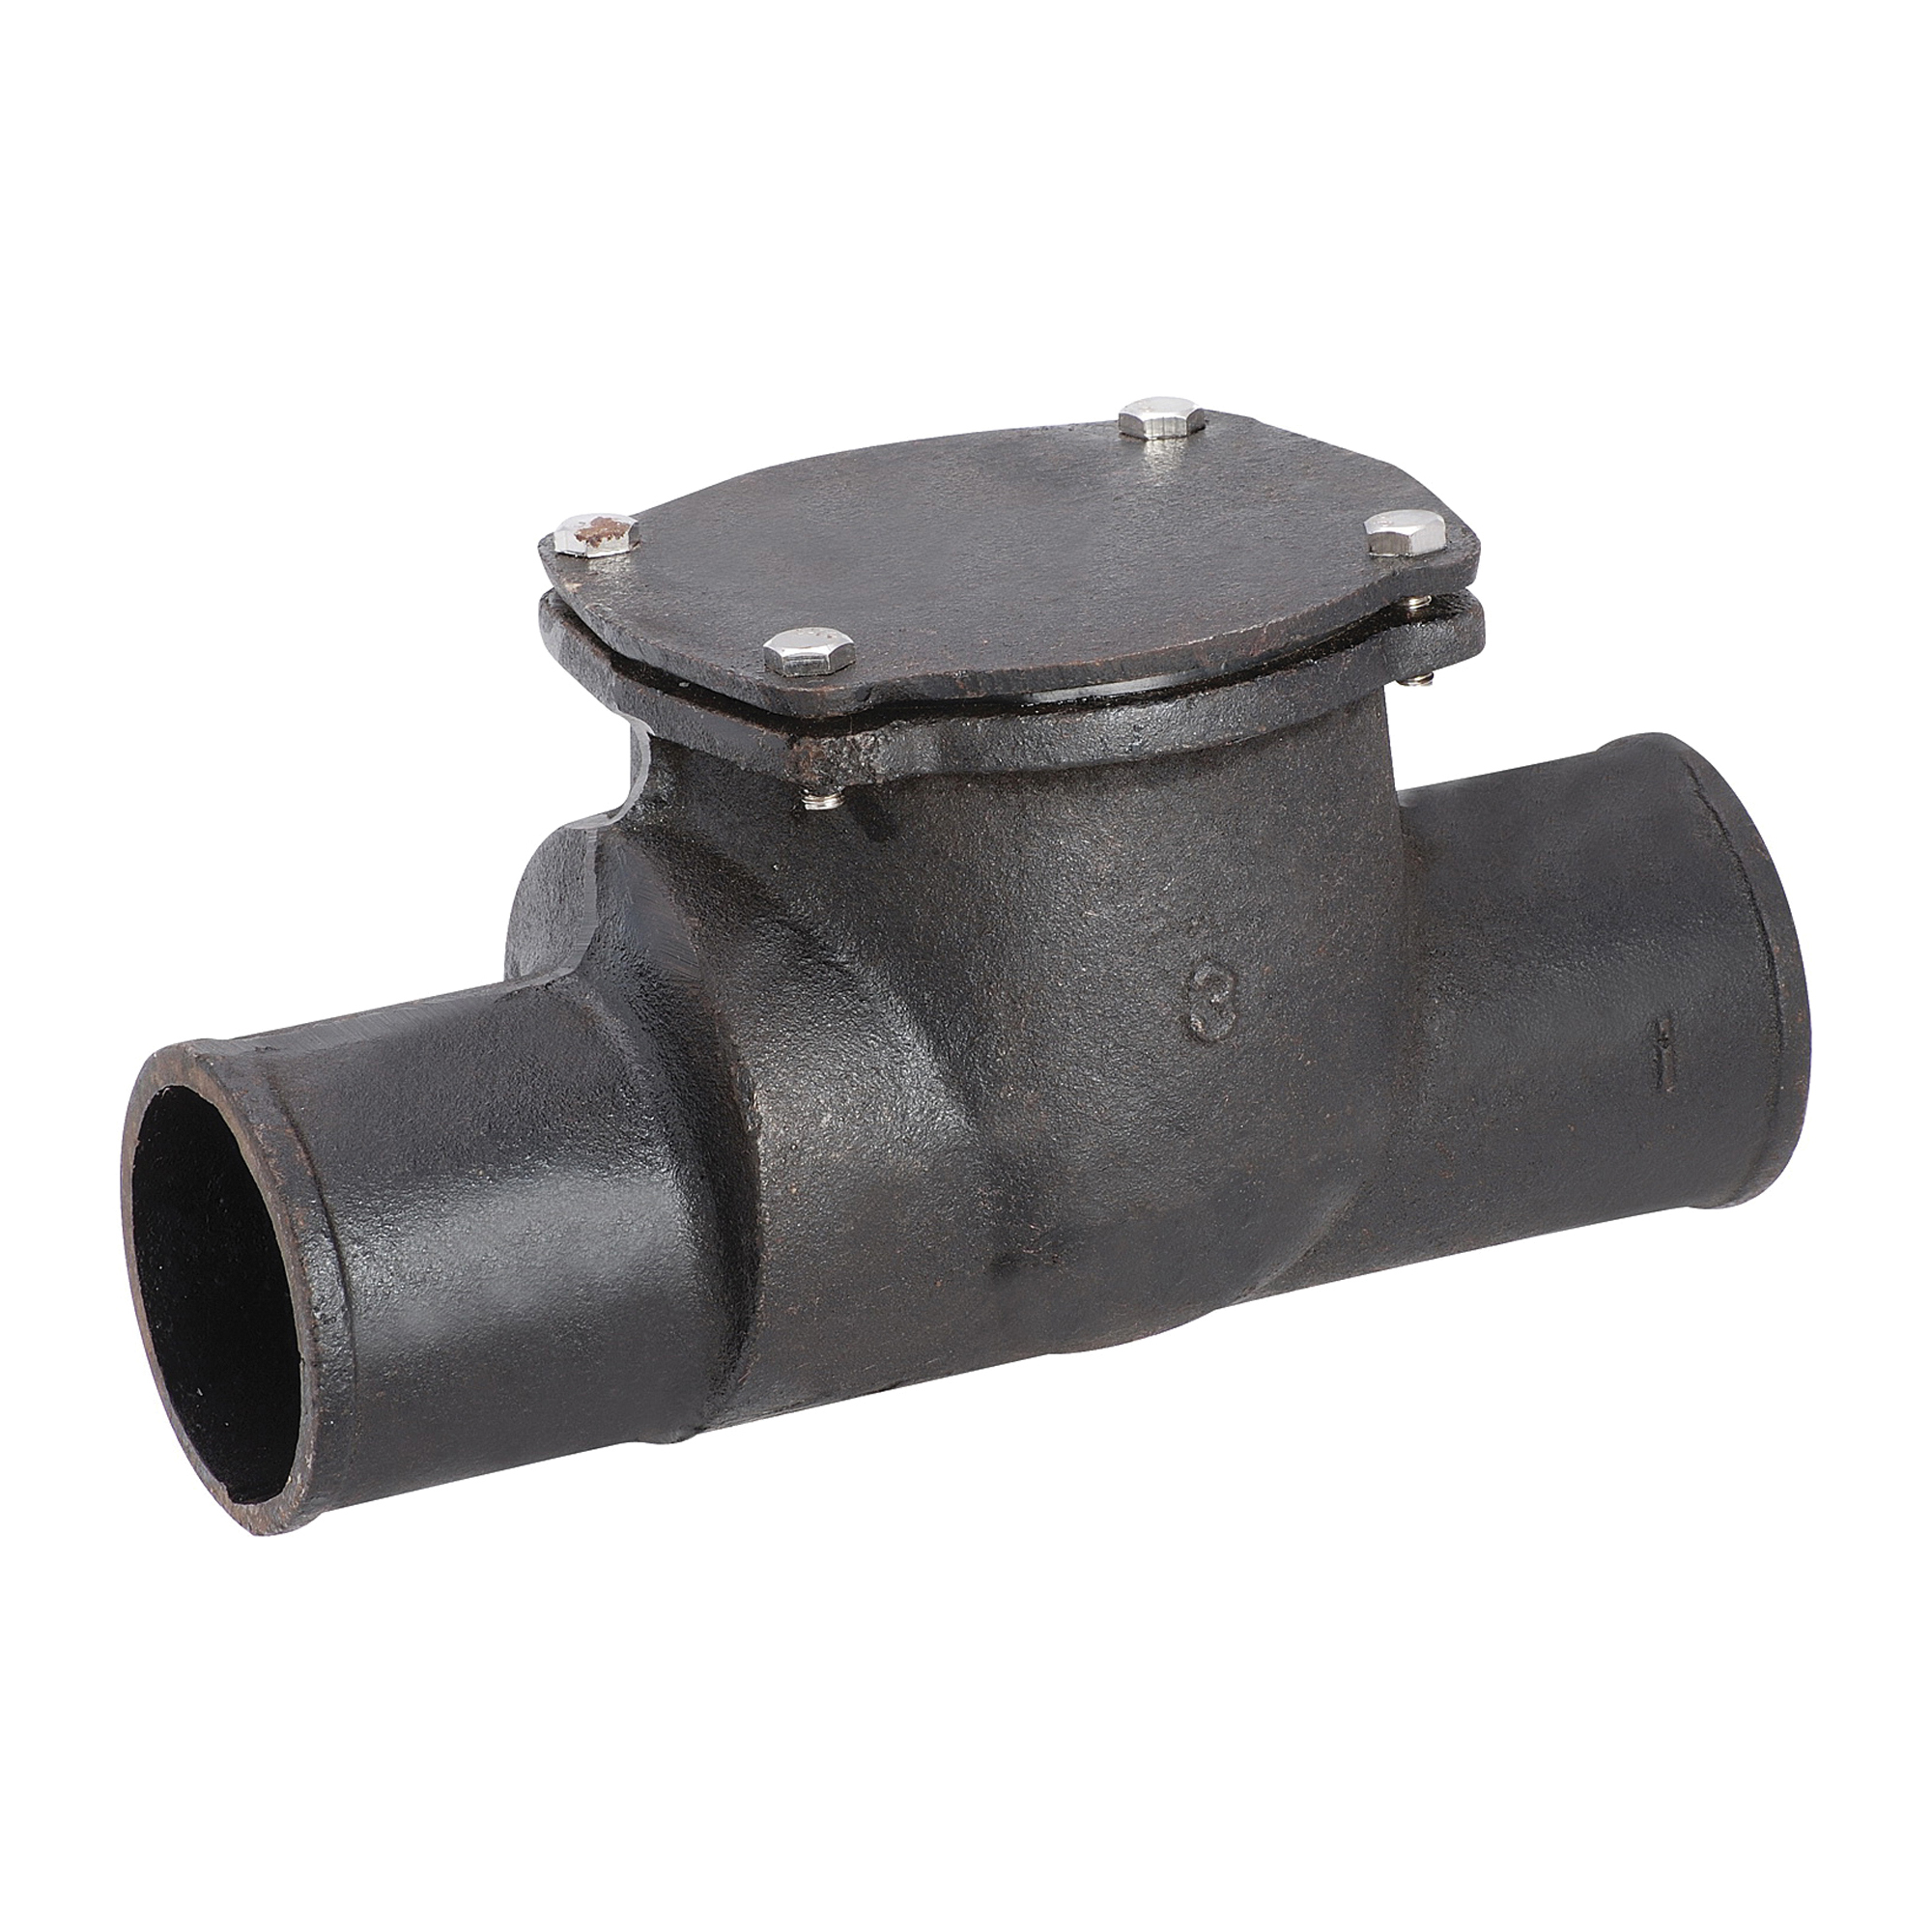 Matco-Norca™ CIBWV10 Backwater Valve Without Hub, 3 in Nominal, Cast Iron Body, Import